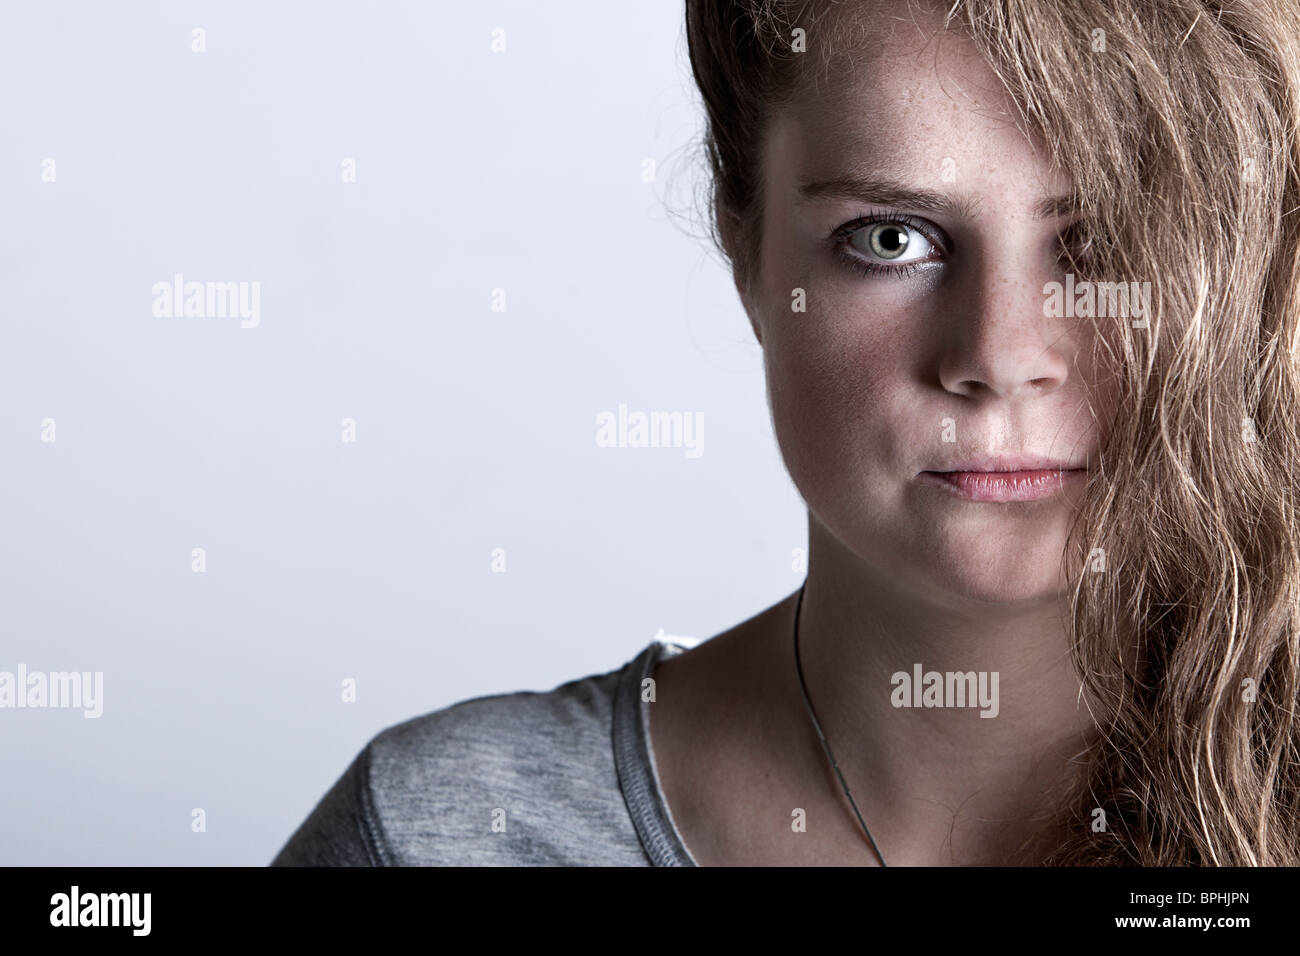 Shot of a Young Woman with her Hair Covering Half of her Face Stock Photo